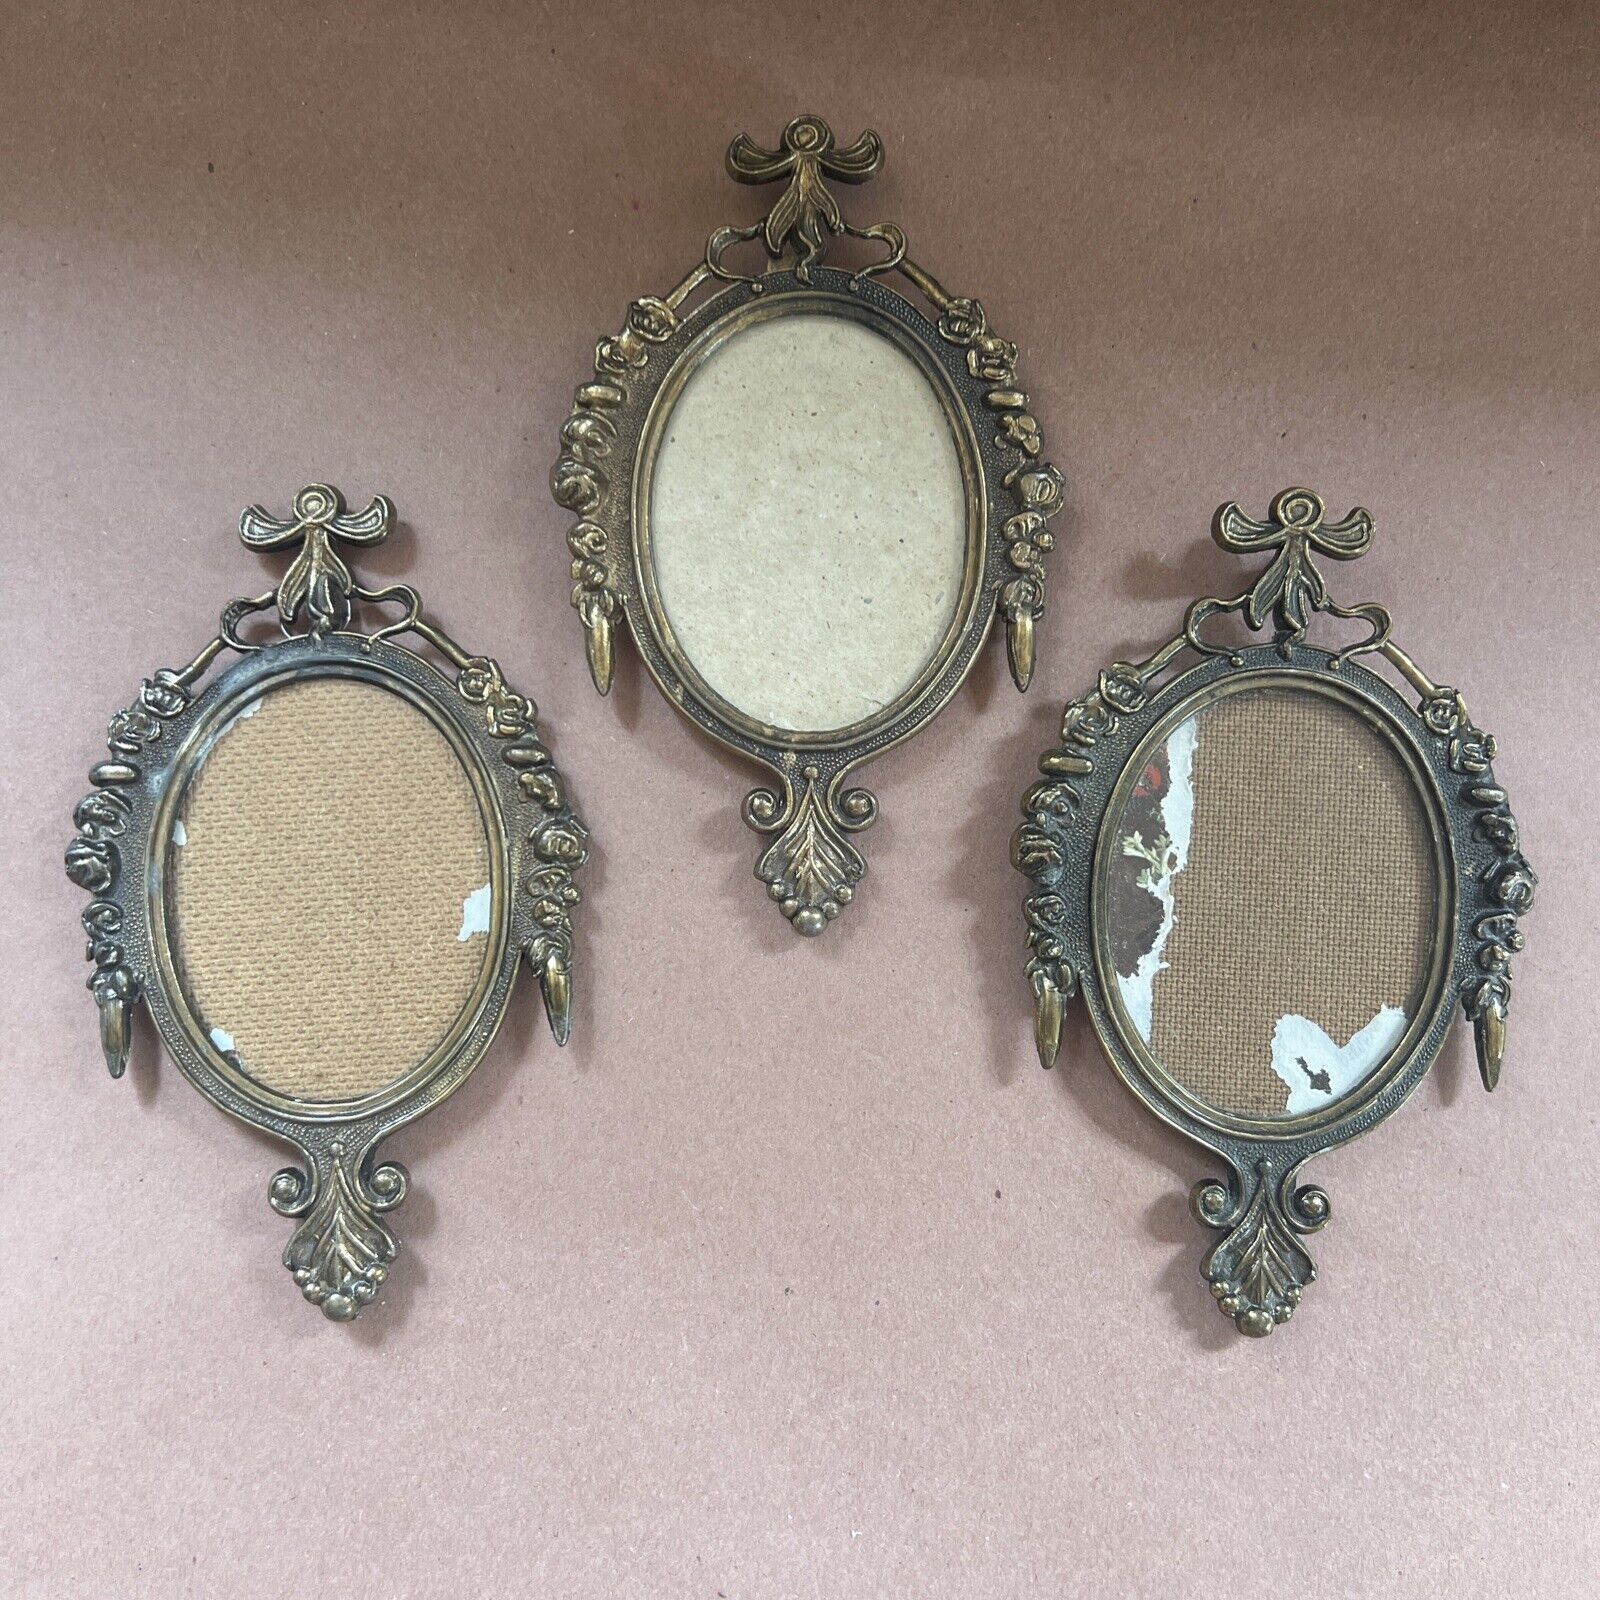 3 Vintage OVAL BRASS FRAMES MADE IN ITALY